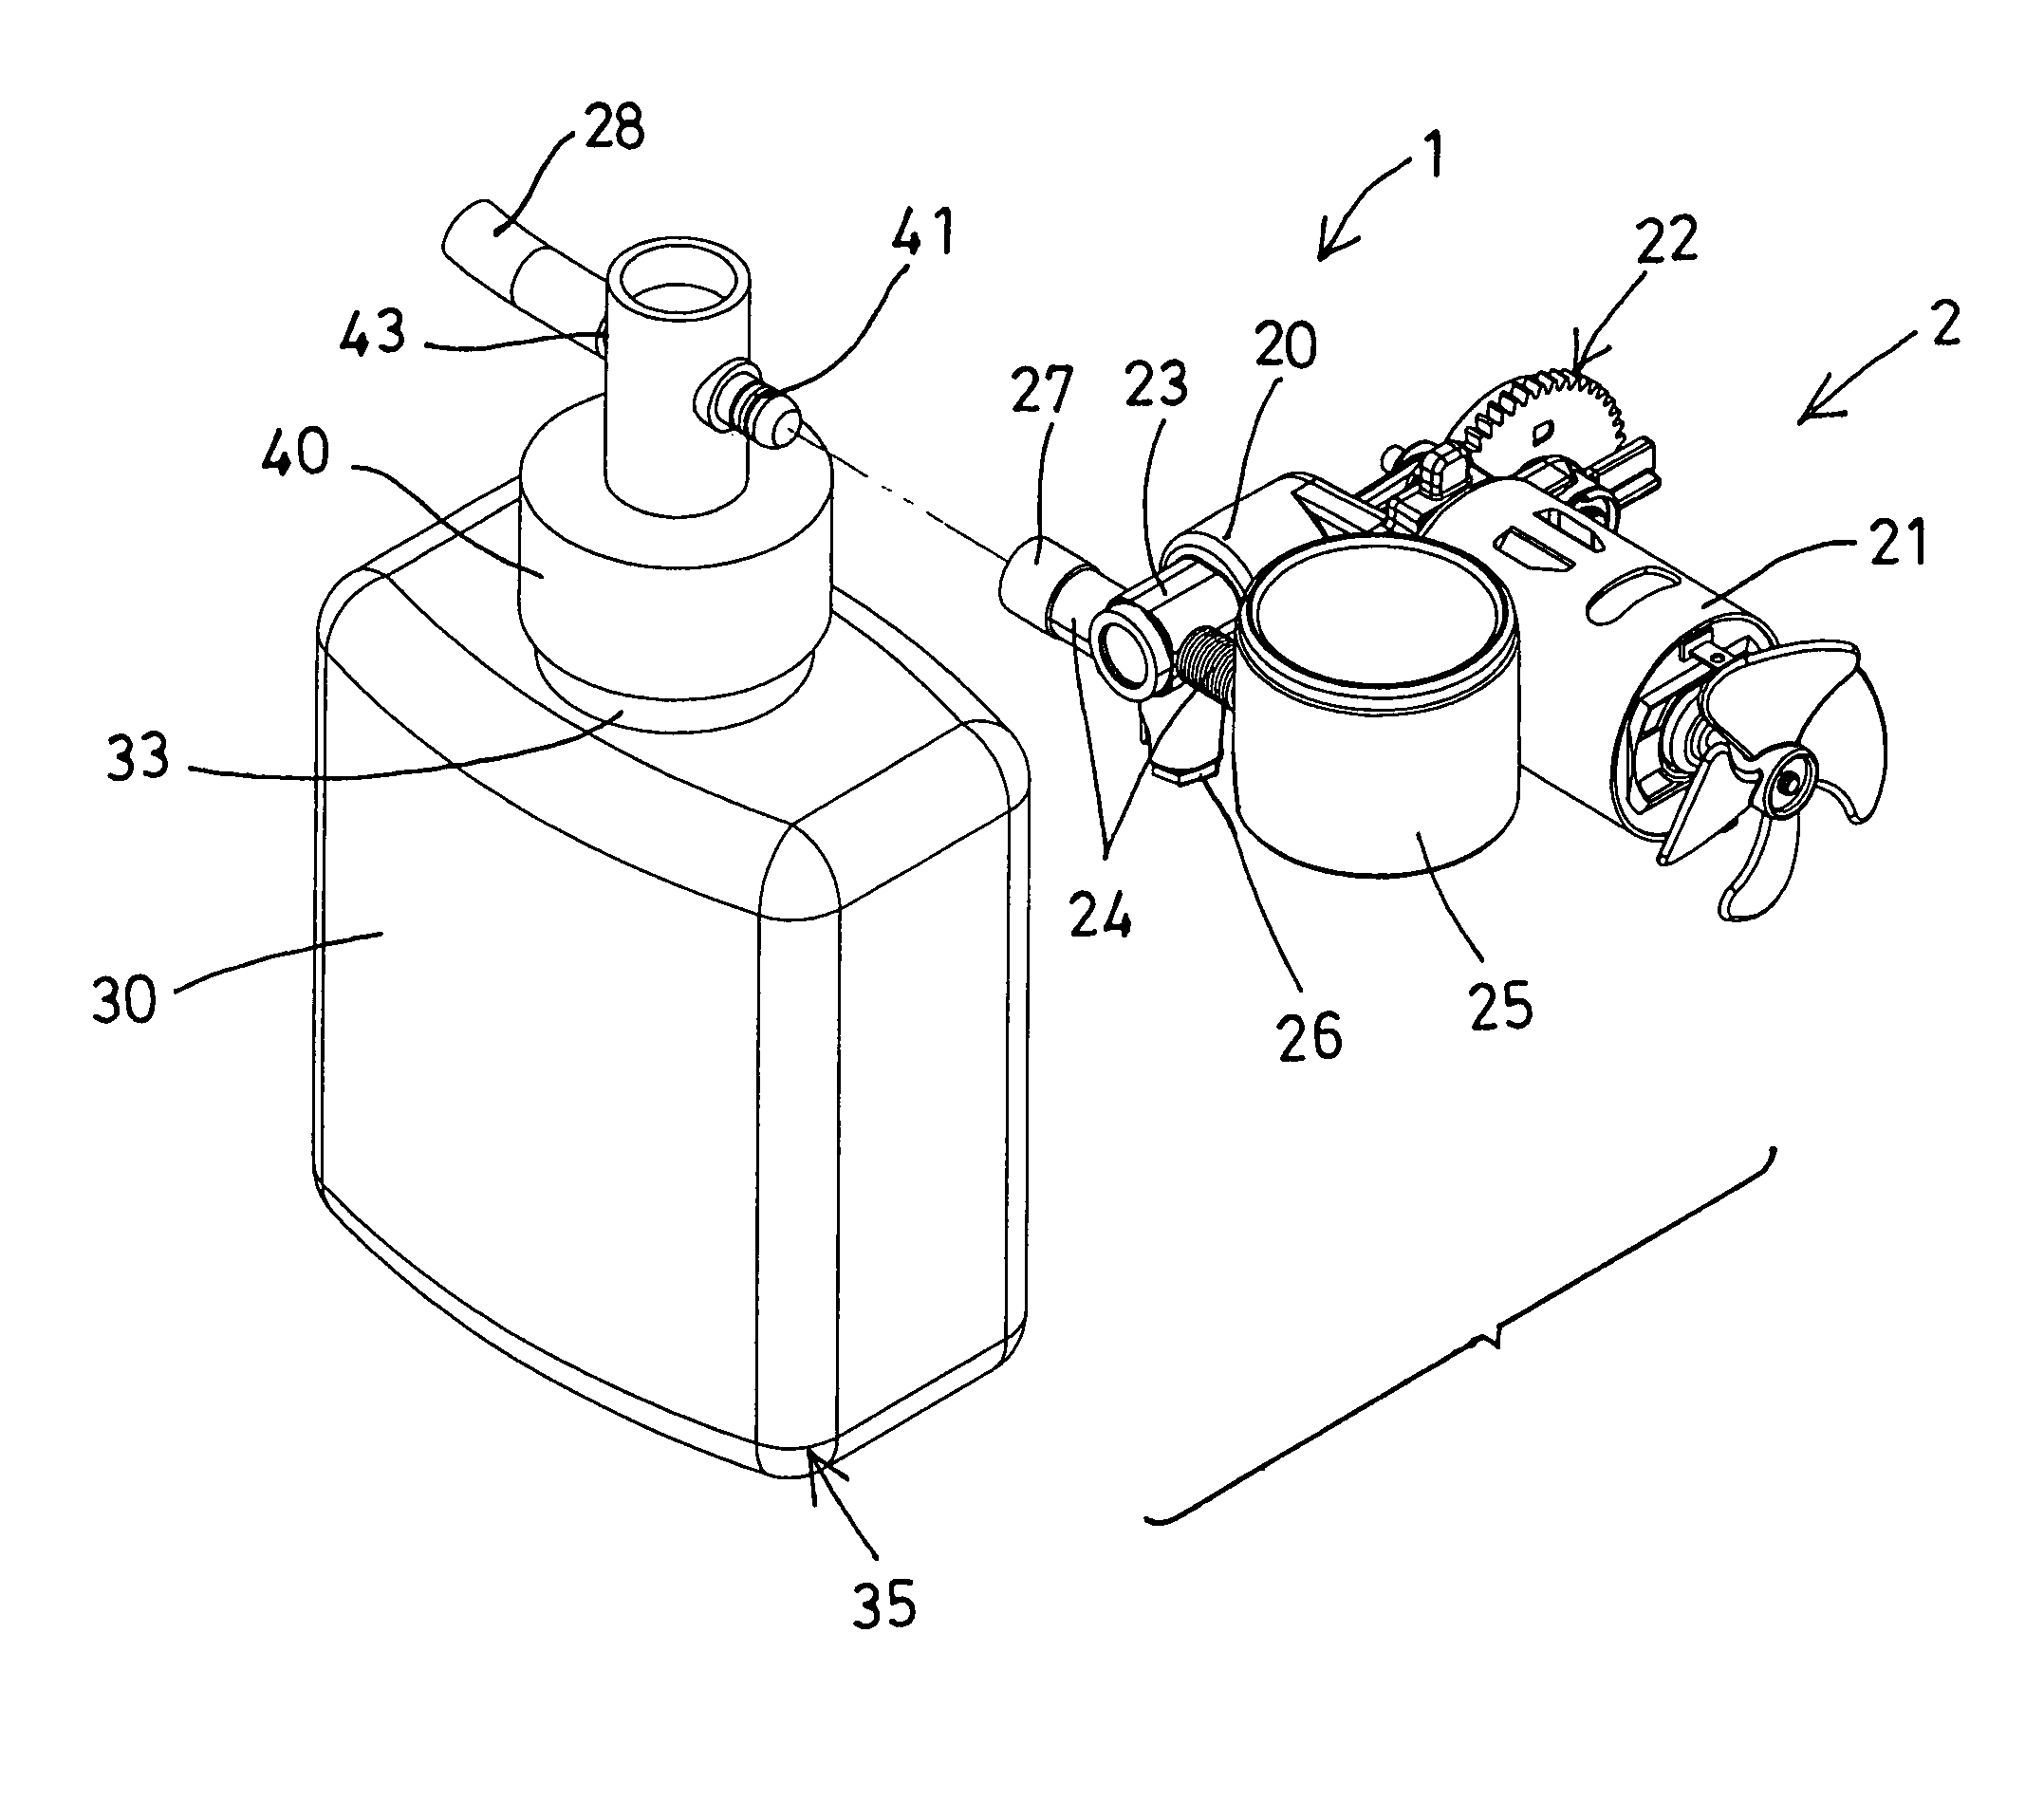 Device for sealing and inflating inflatable object